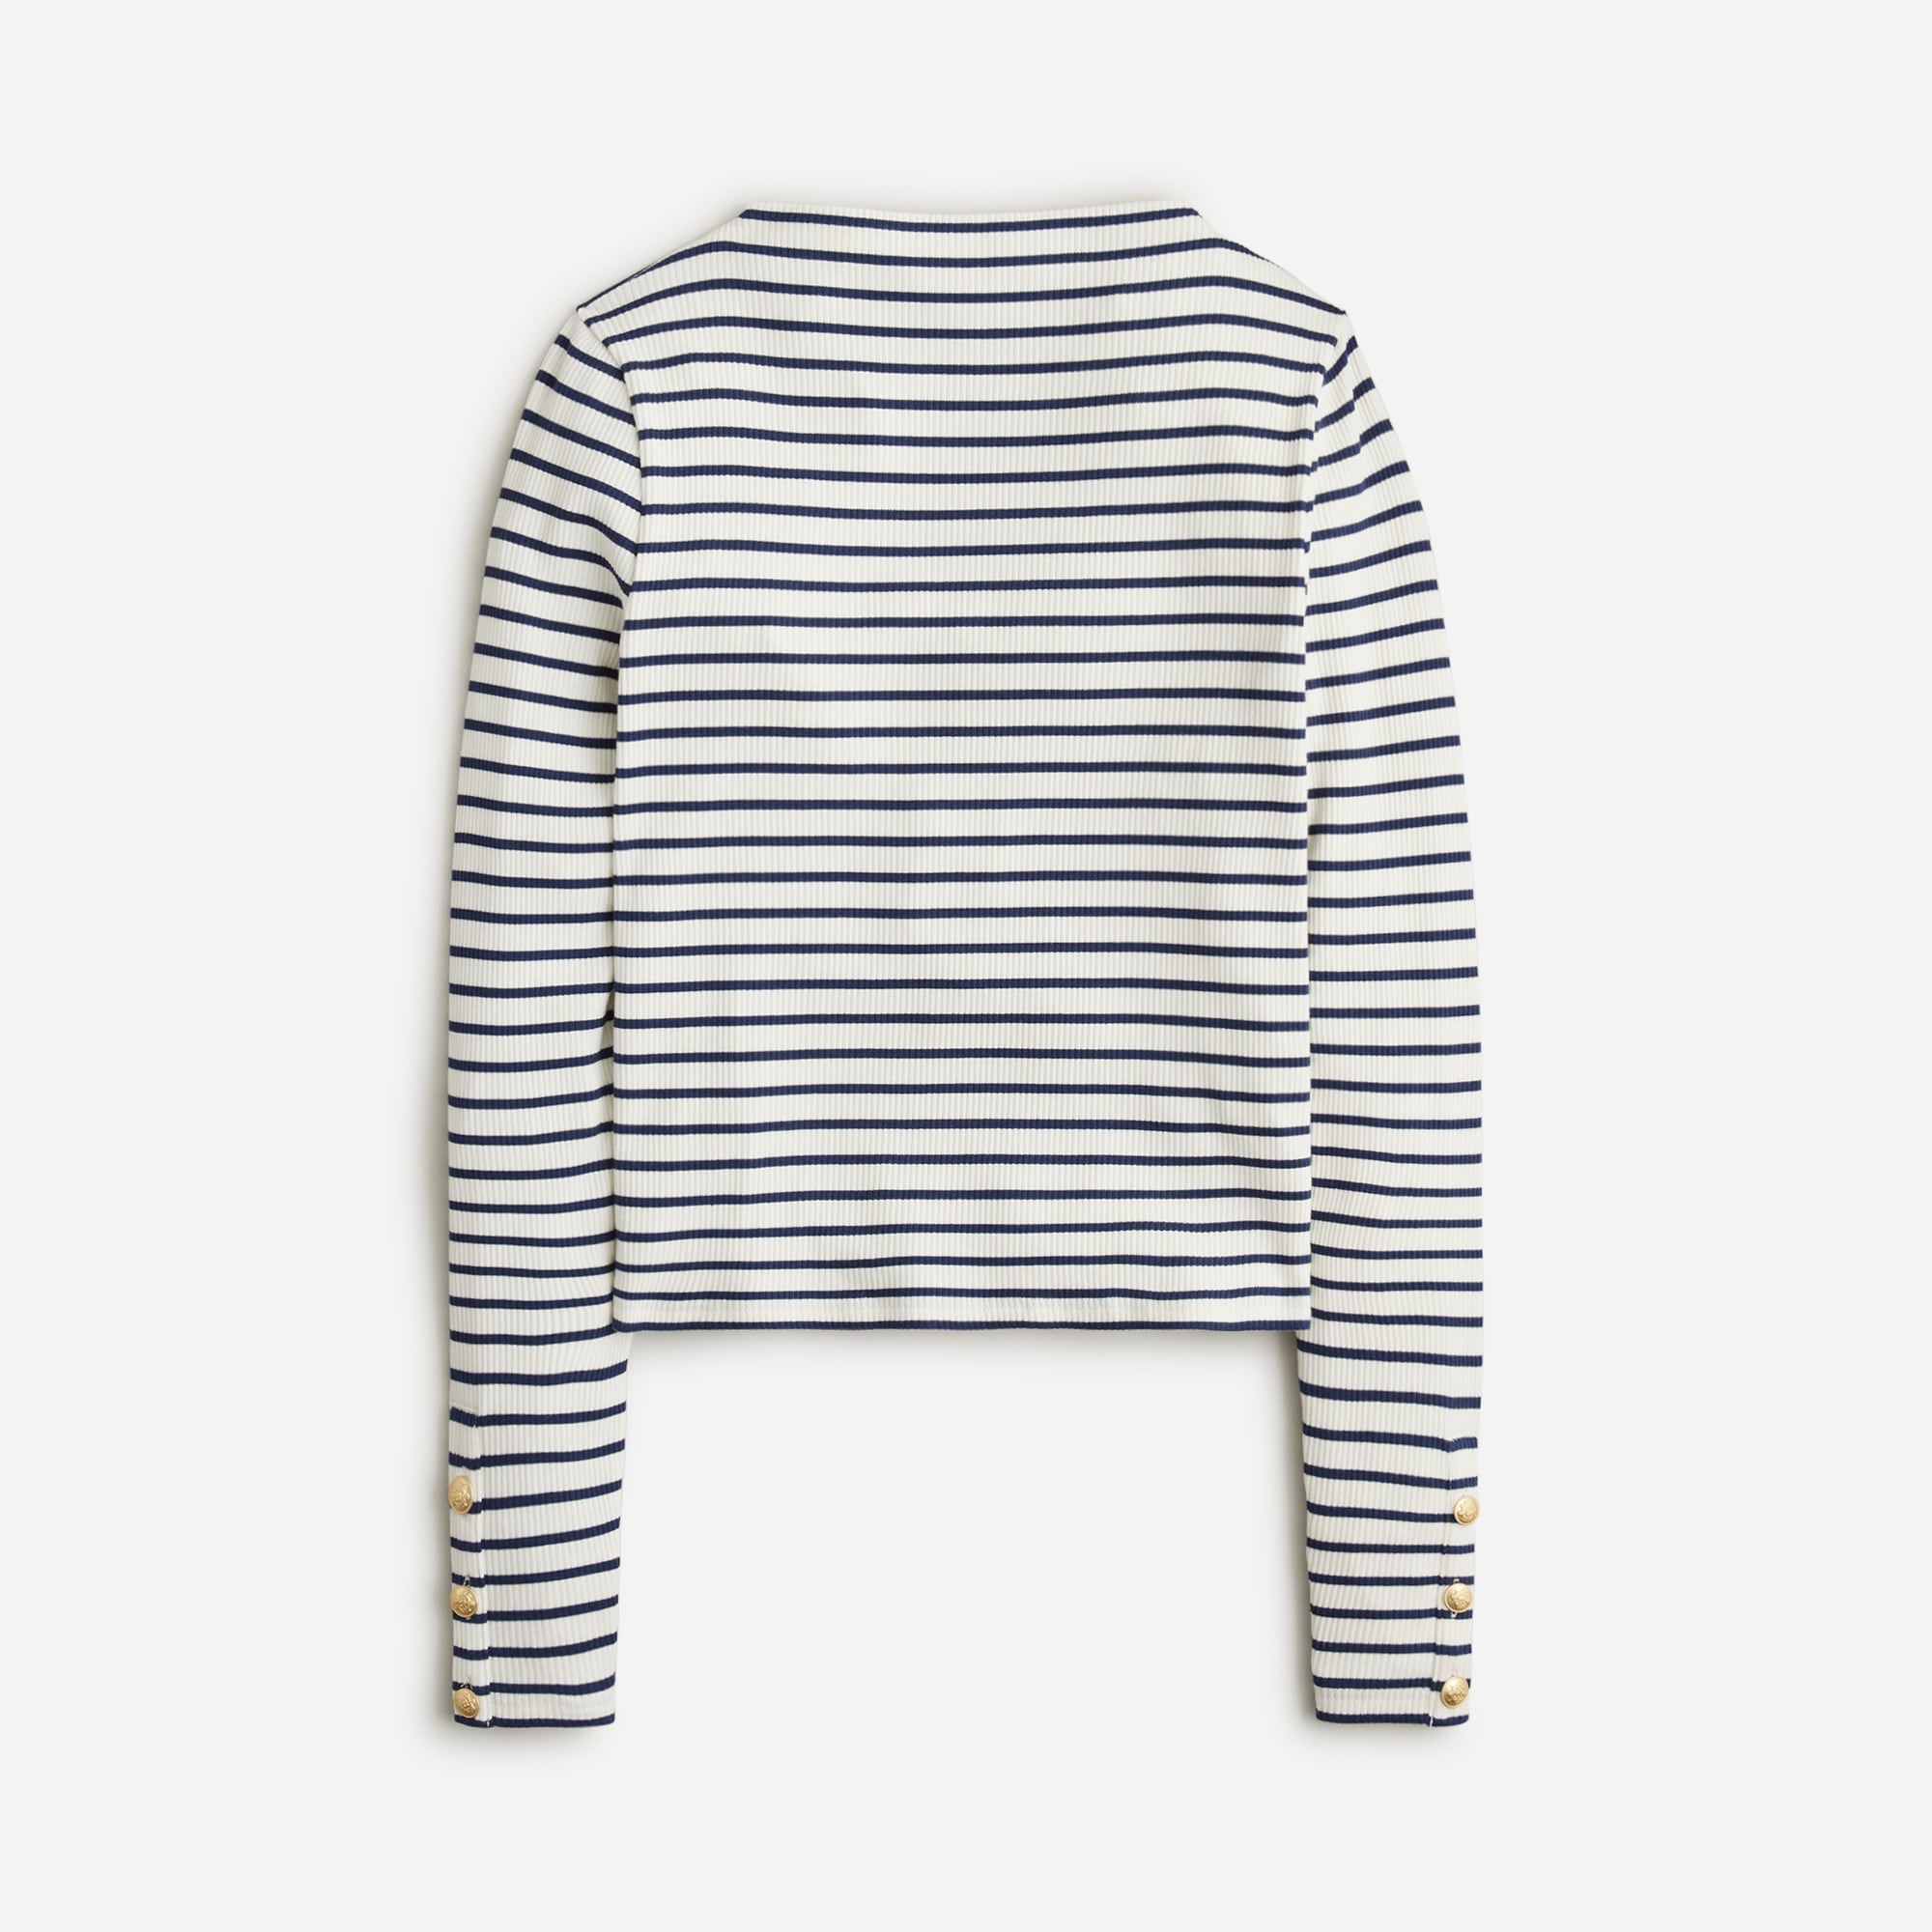  Vintage rib split-neck T-shirt with buttons in stripe